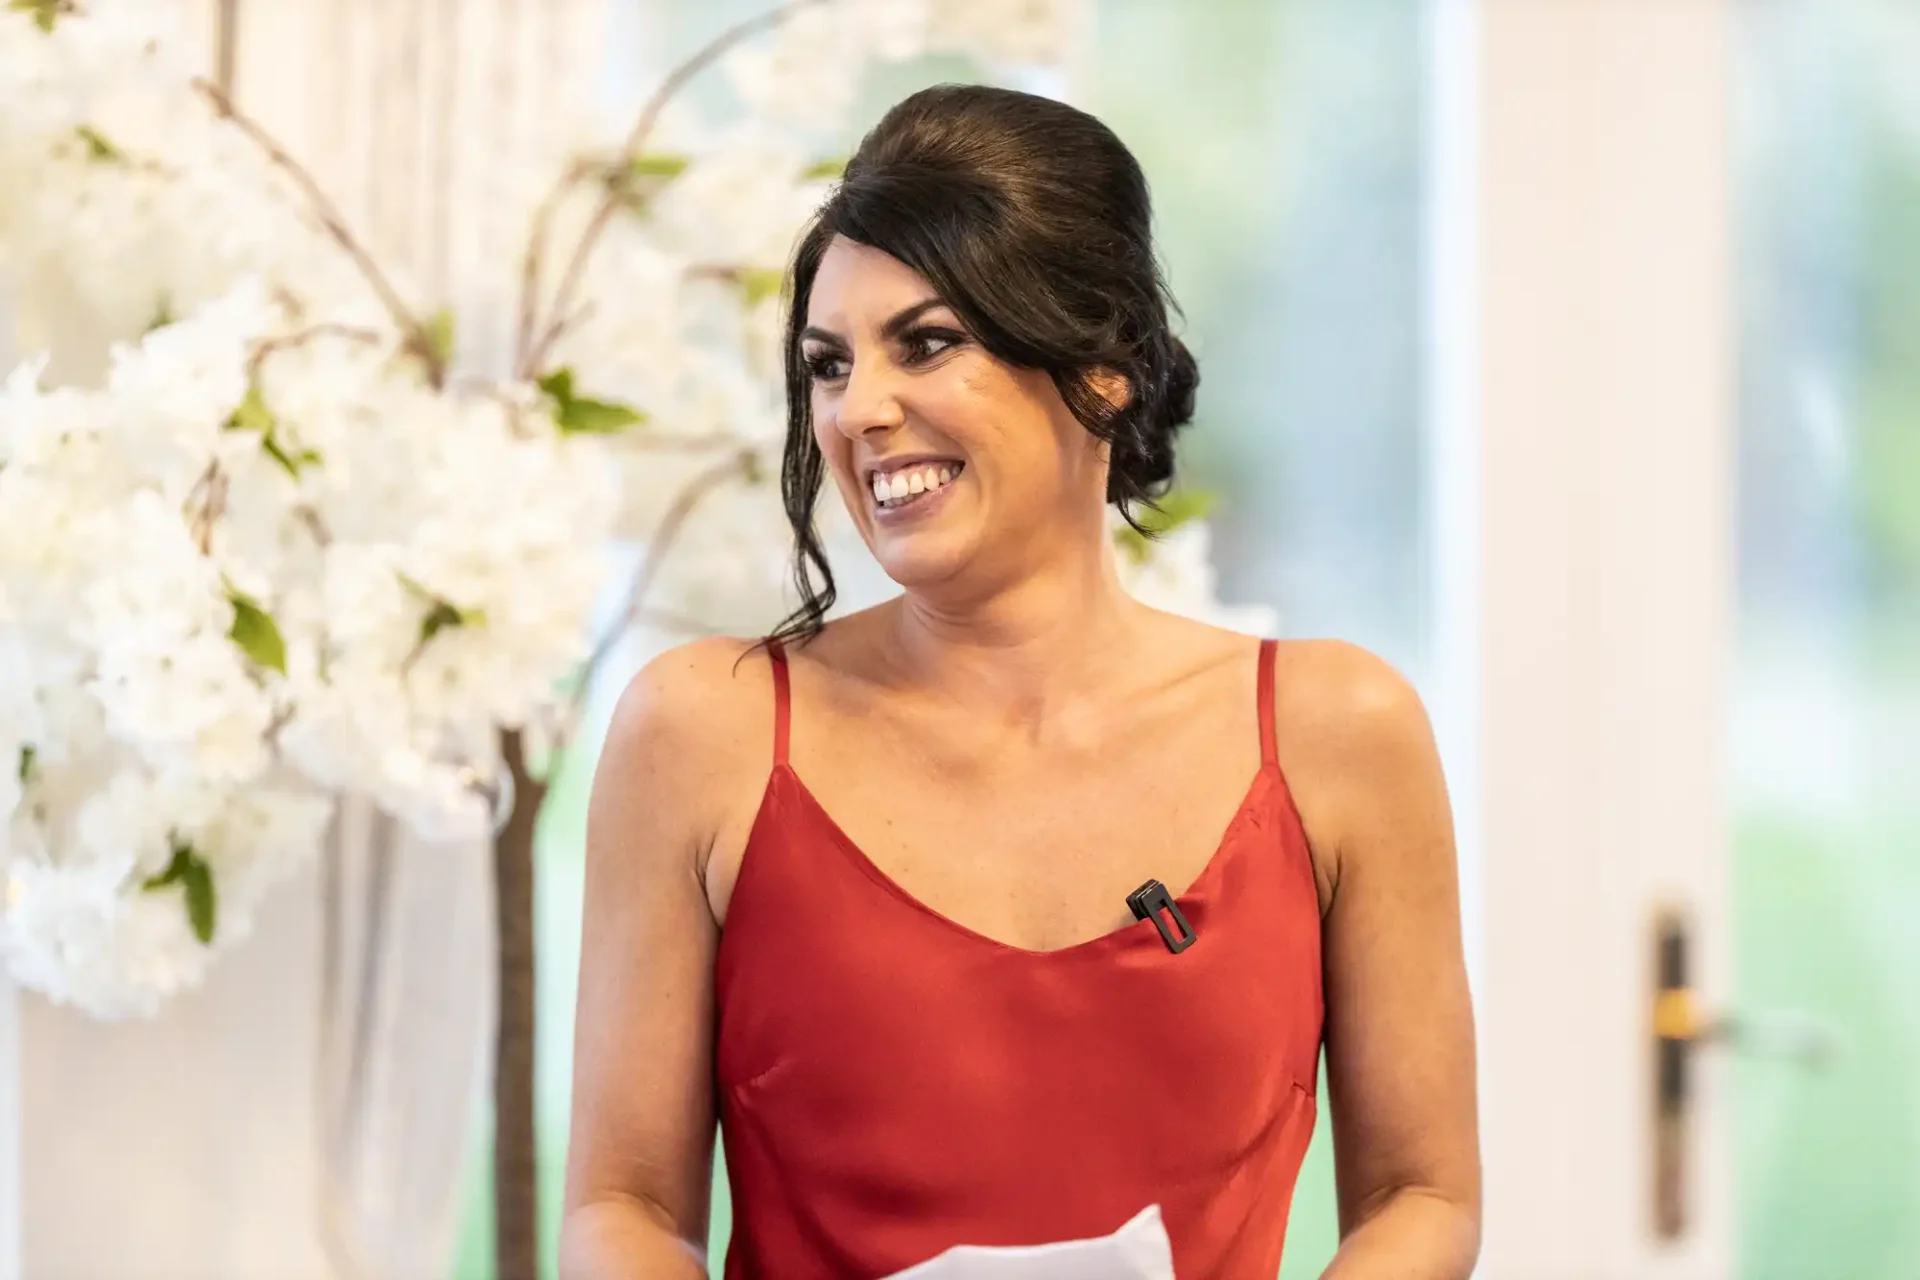 A woman in a red top smiles while looking to the side, standing indoors in a room decorated with white flowers.